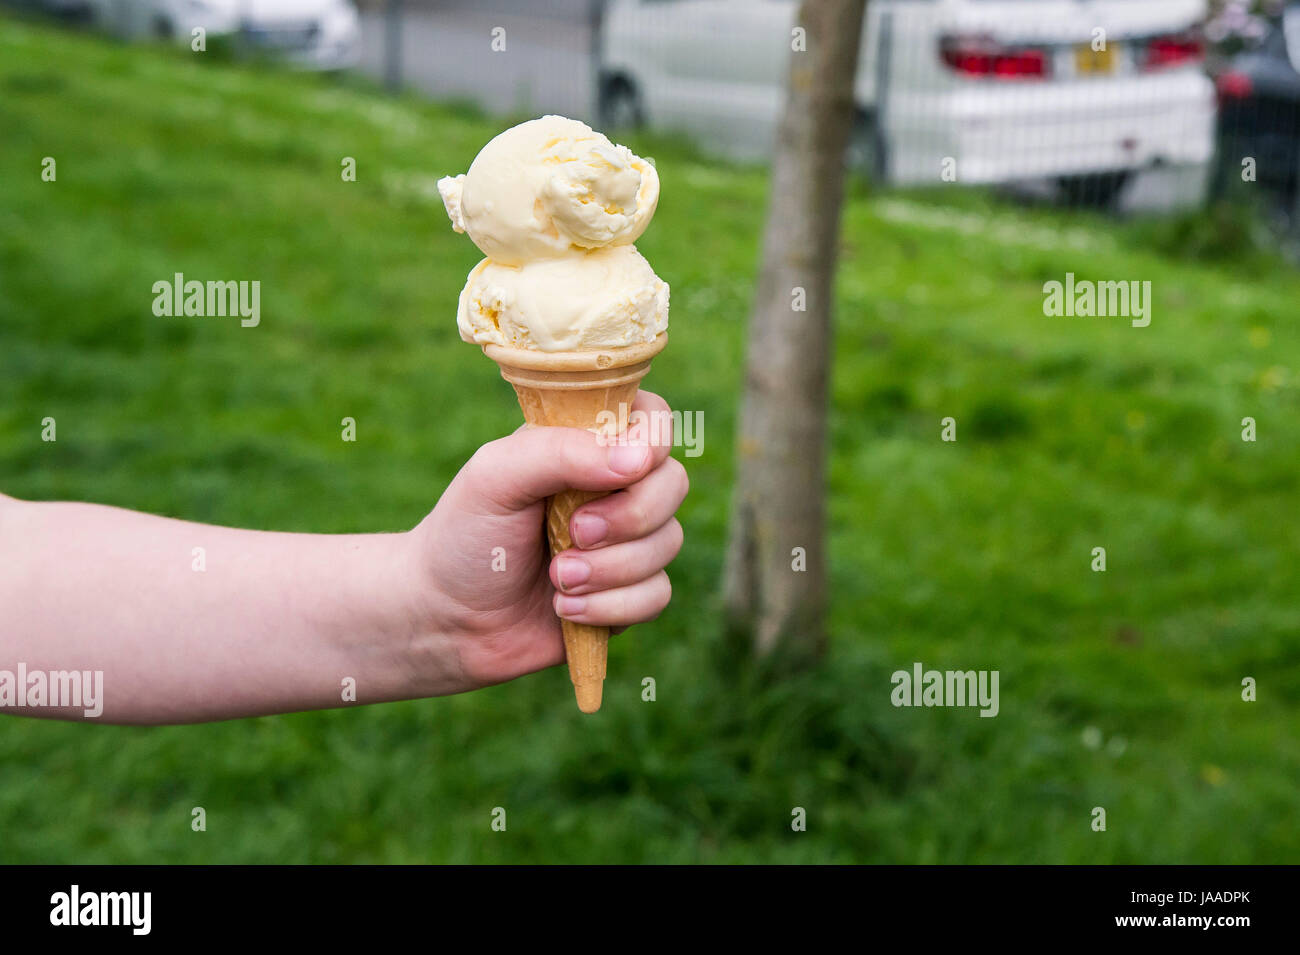 A child holding an ice cream cone; Hand; Child; Treat; Vanilla ice cream; Ice cream cone; Cornet; Double scoop; Refreshing; Refreshment; Stock Photo